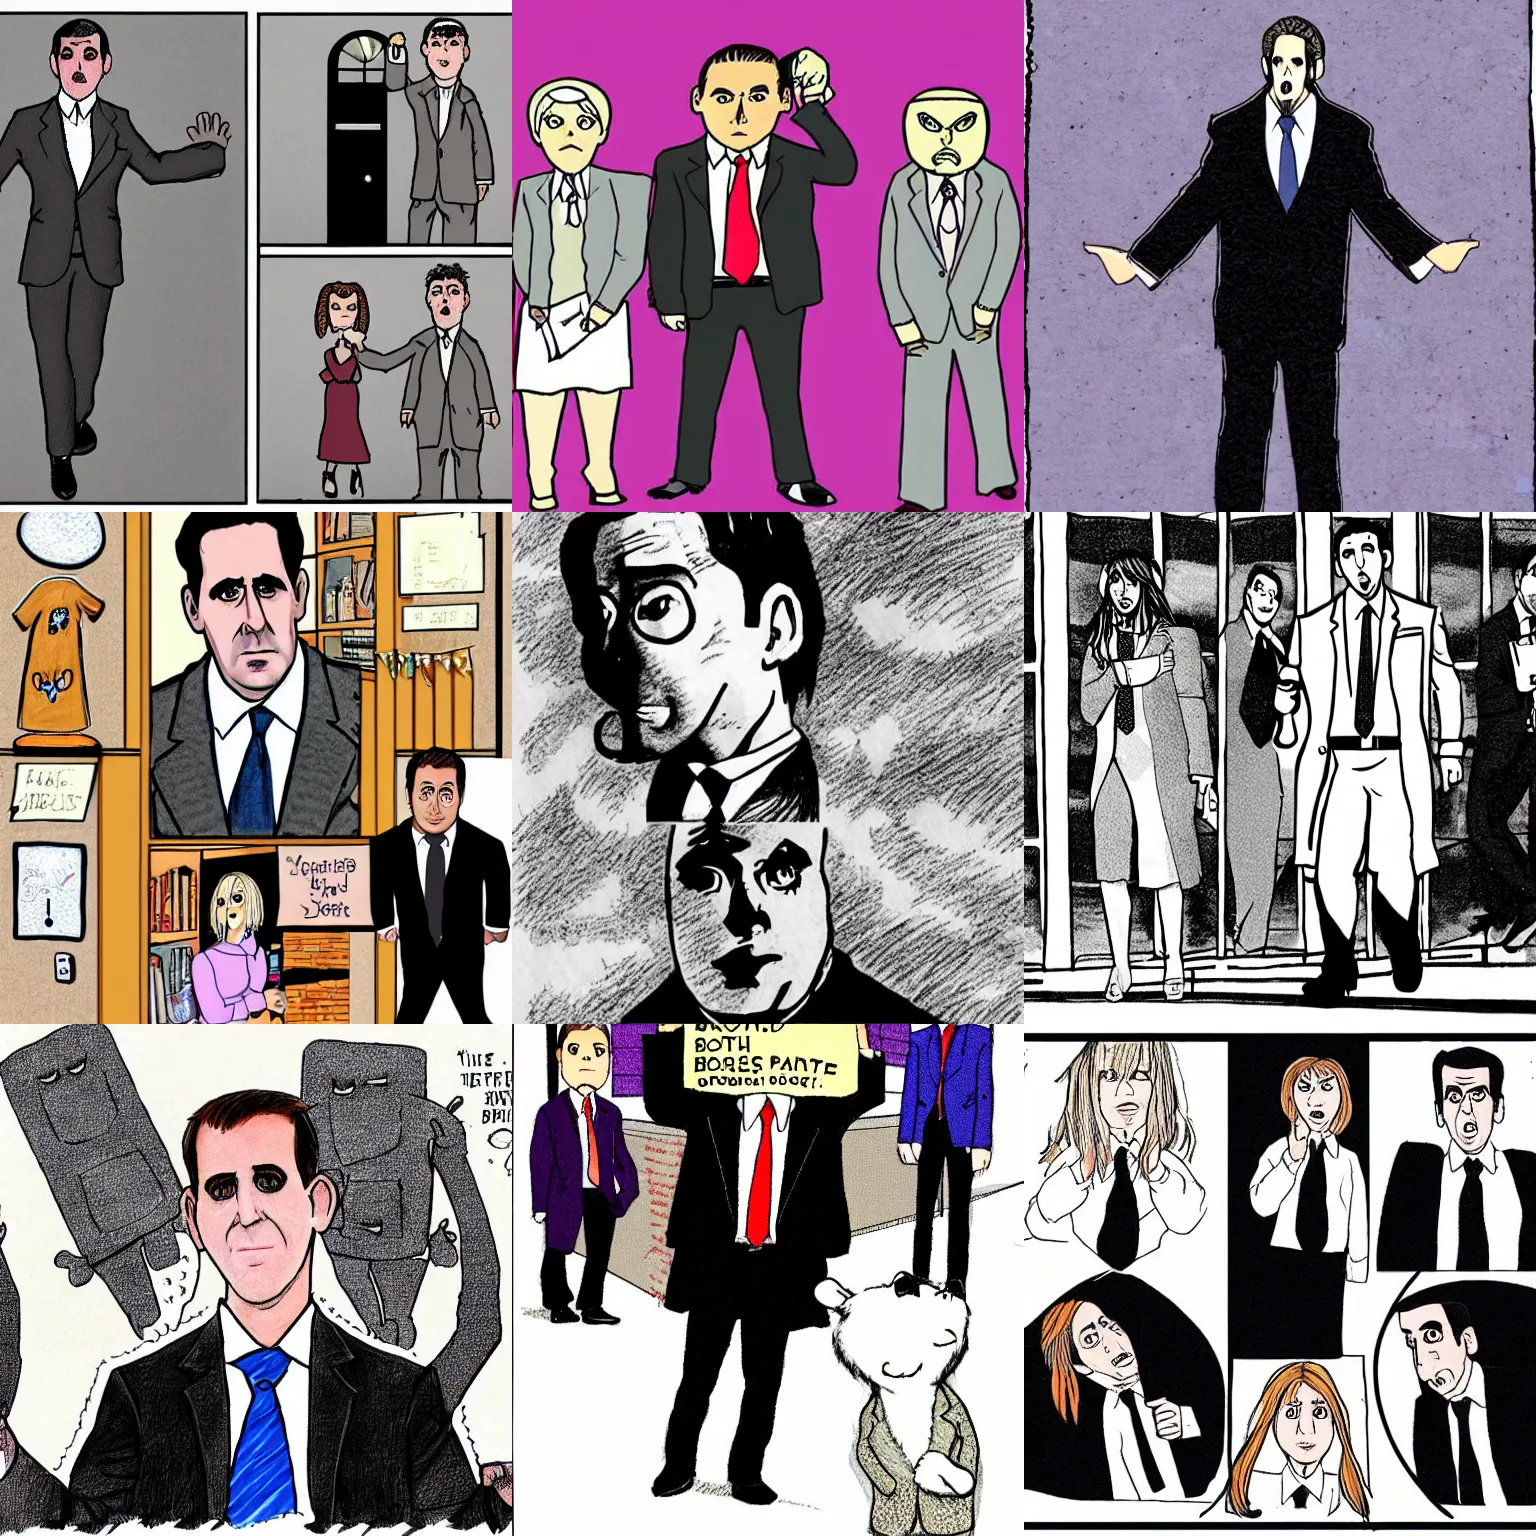 Prompt: The office michael scott dressed as britney spears edward gorey drawn style